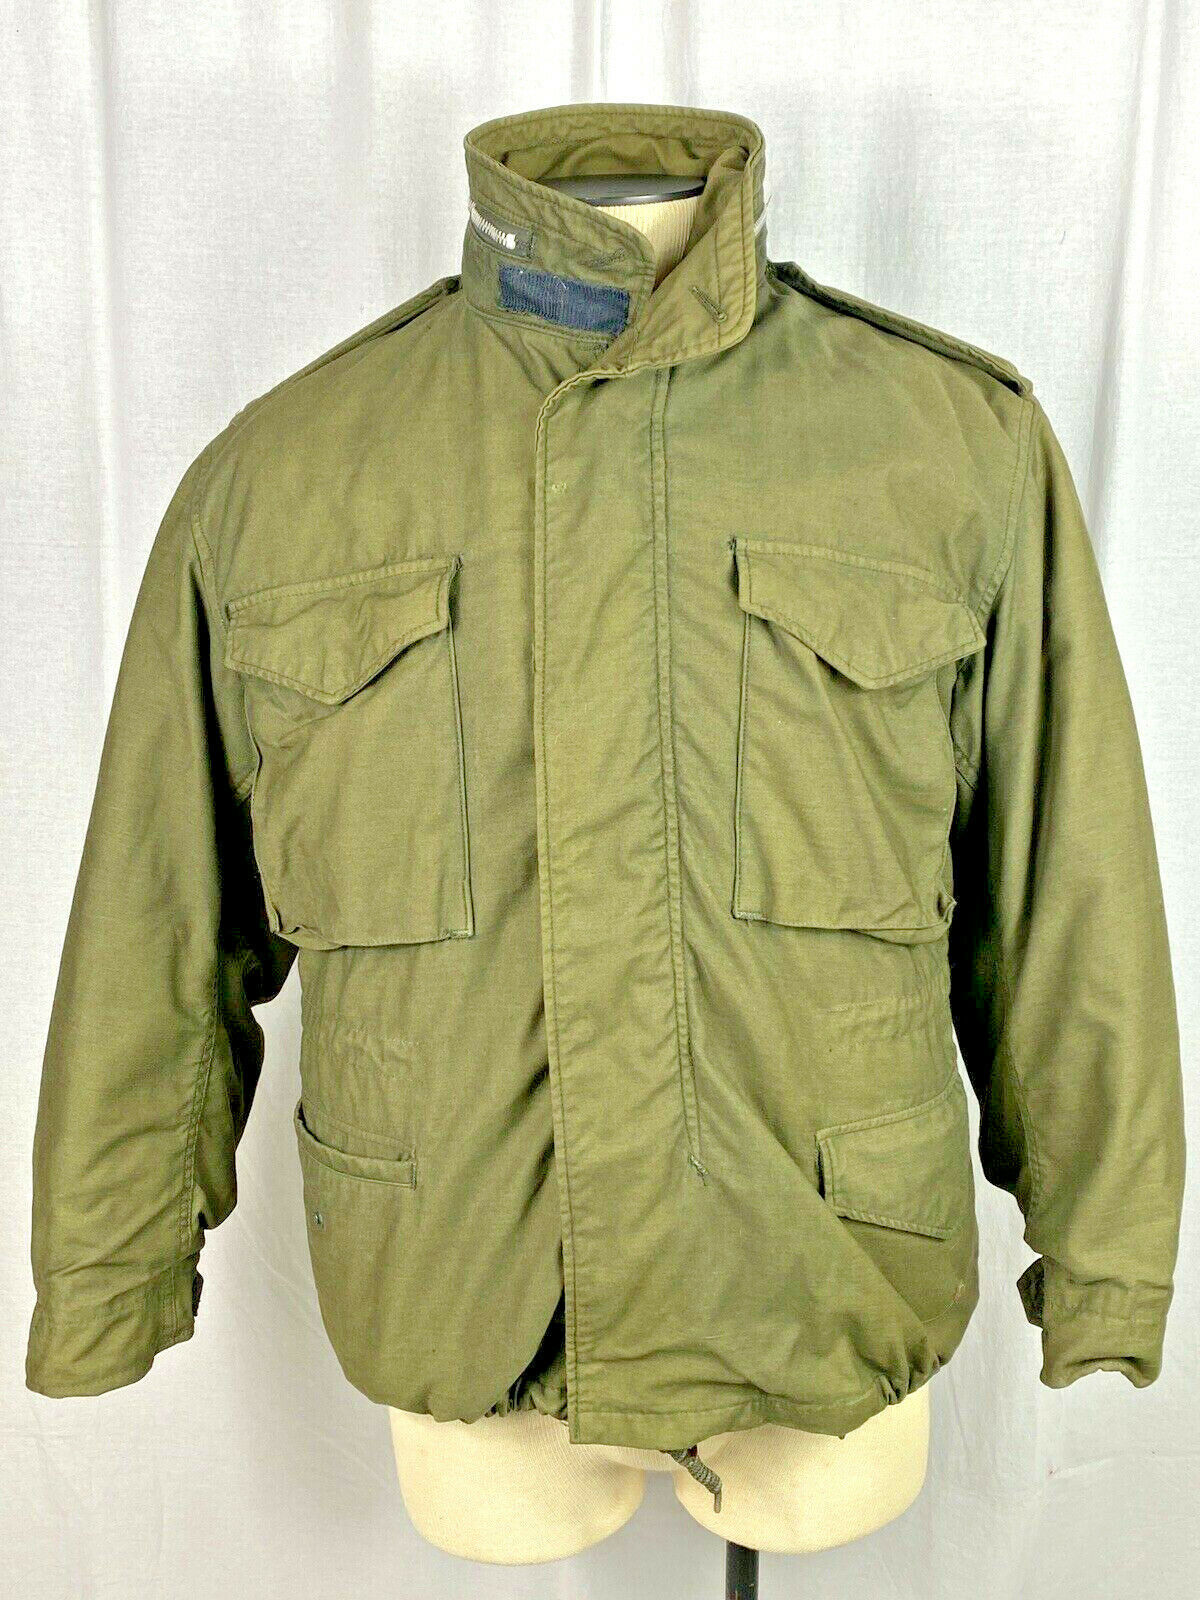 Primary image for US M-65 Military Coat Man's Field With Hood WITH LINER Green M Vietnam Era Parka